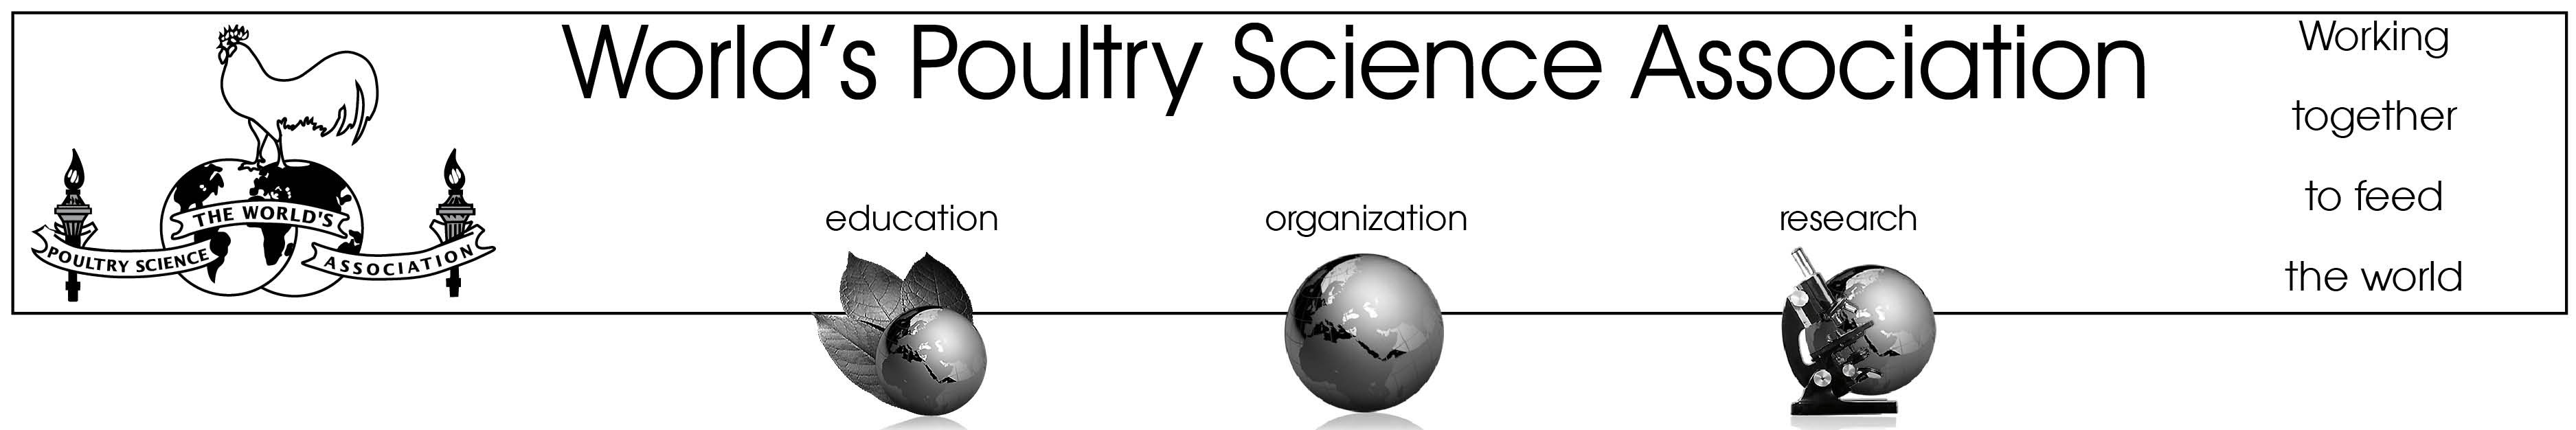 Worlds Poultry Science Association